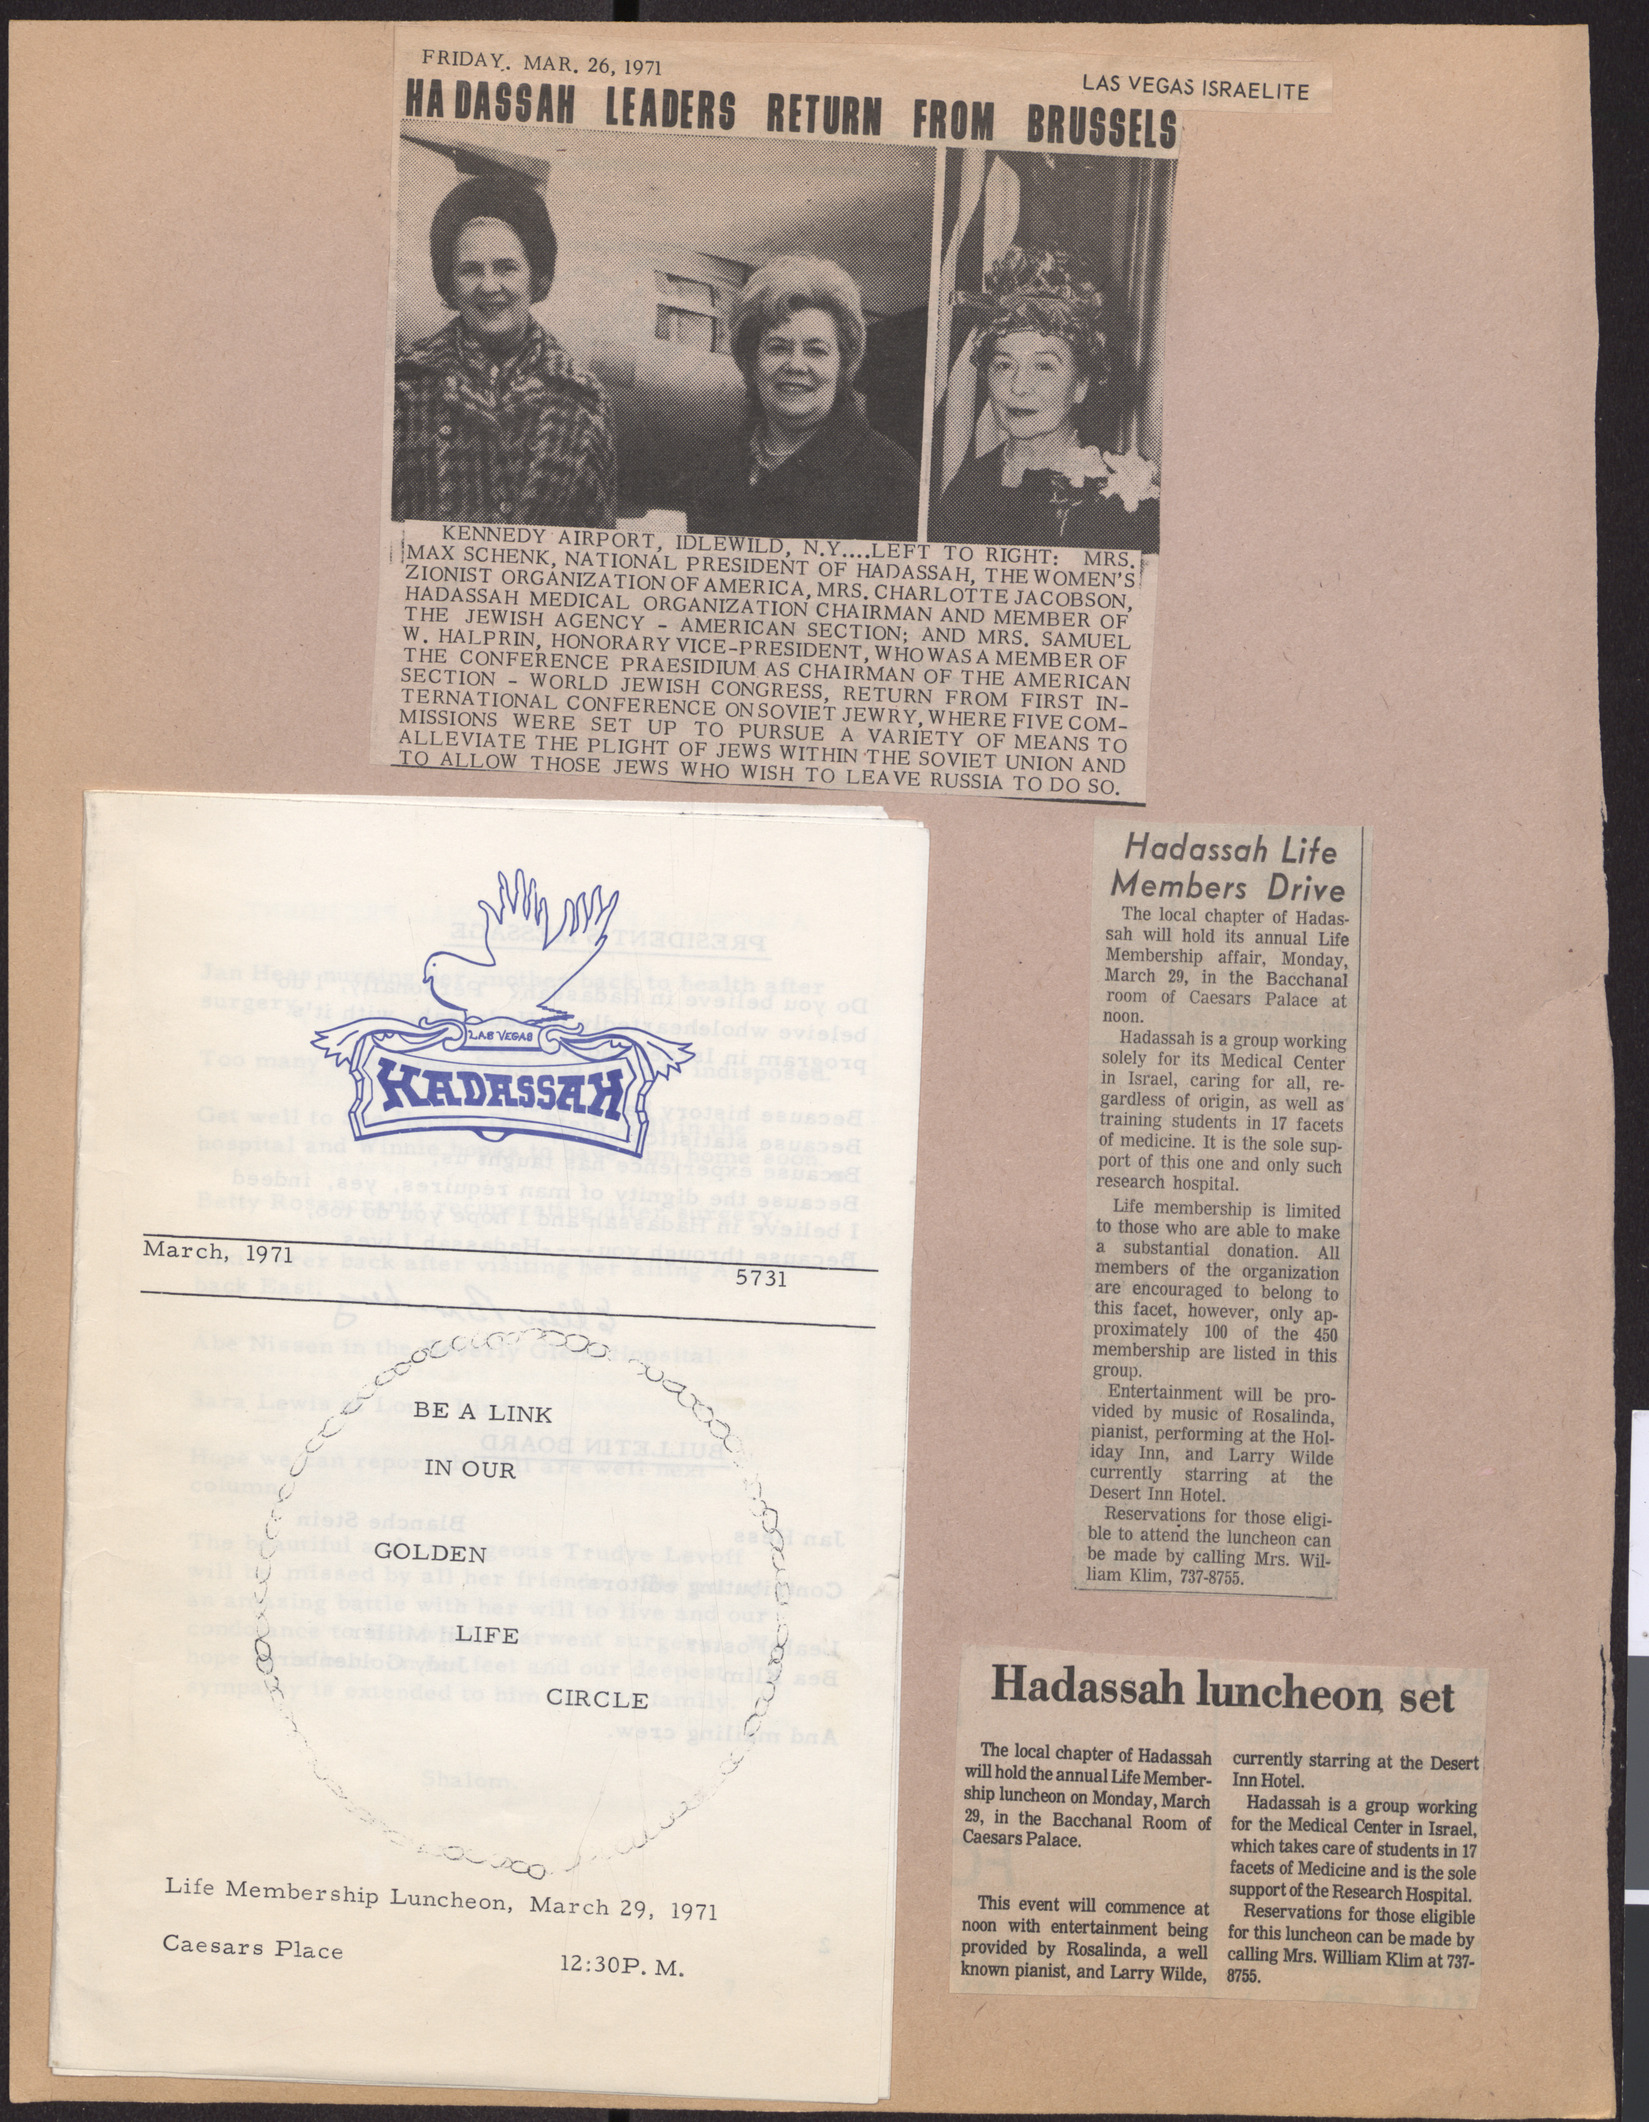 Newspaper clippings about Hadassah leaders, events and meetings, and Hadassah newsletter, March 1971